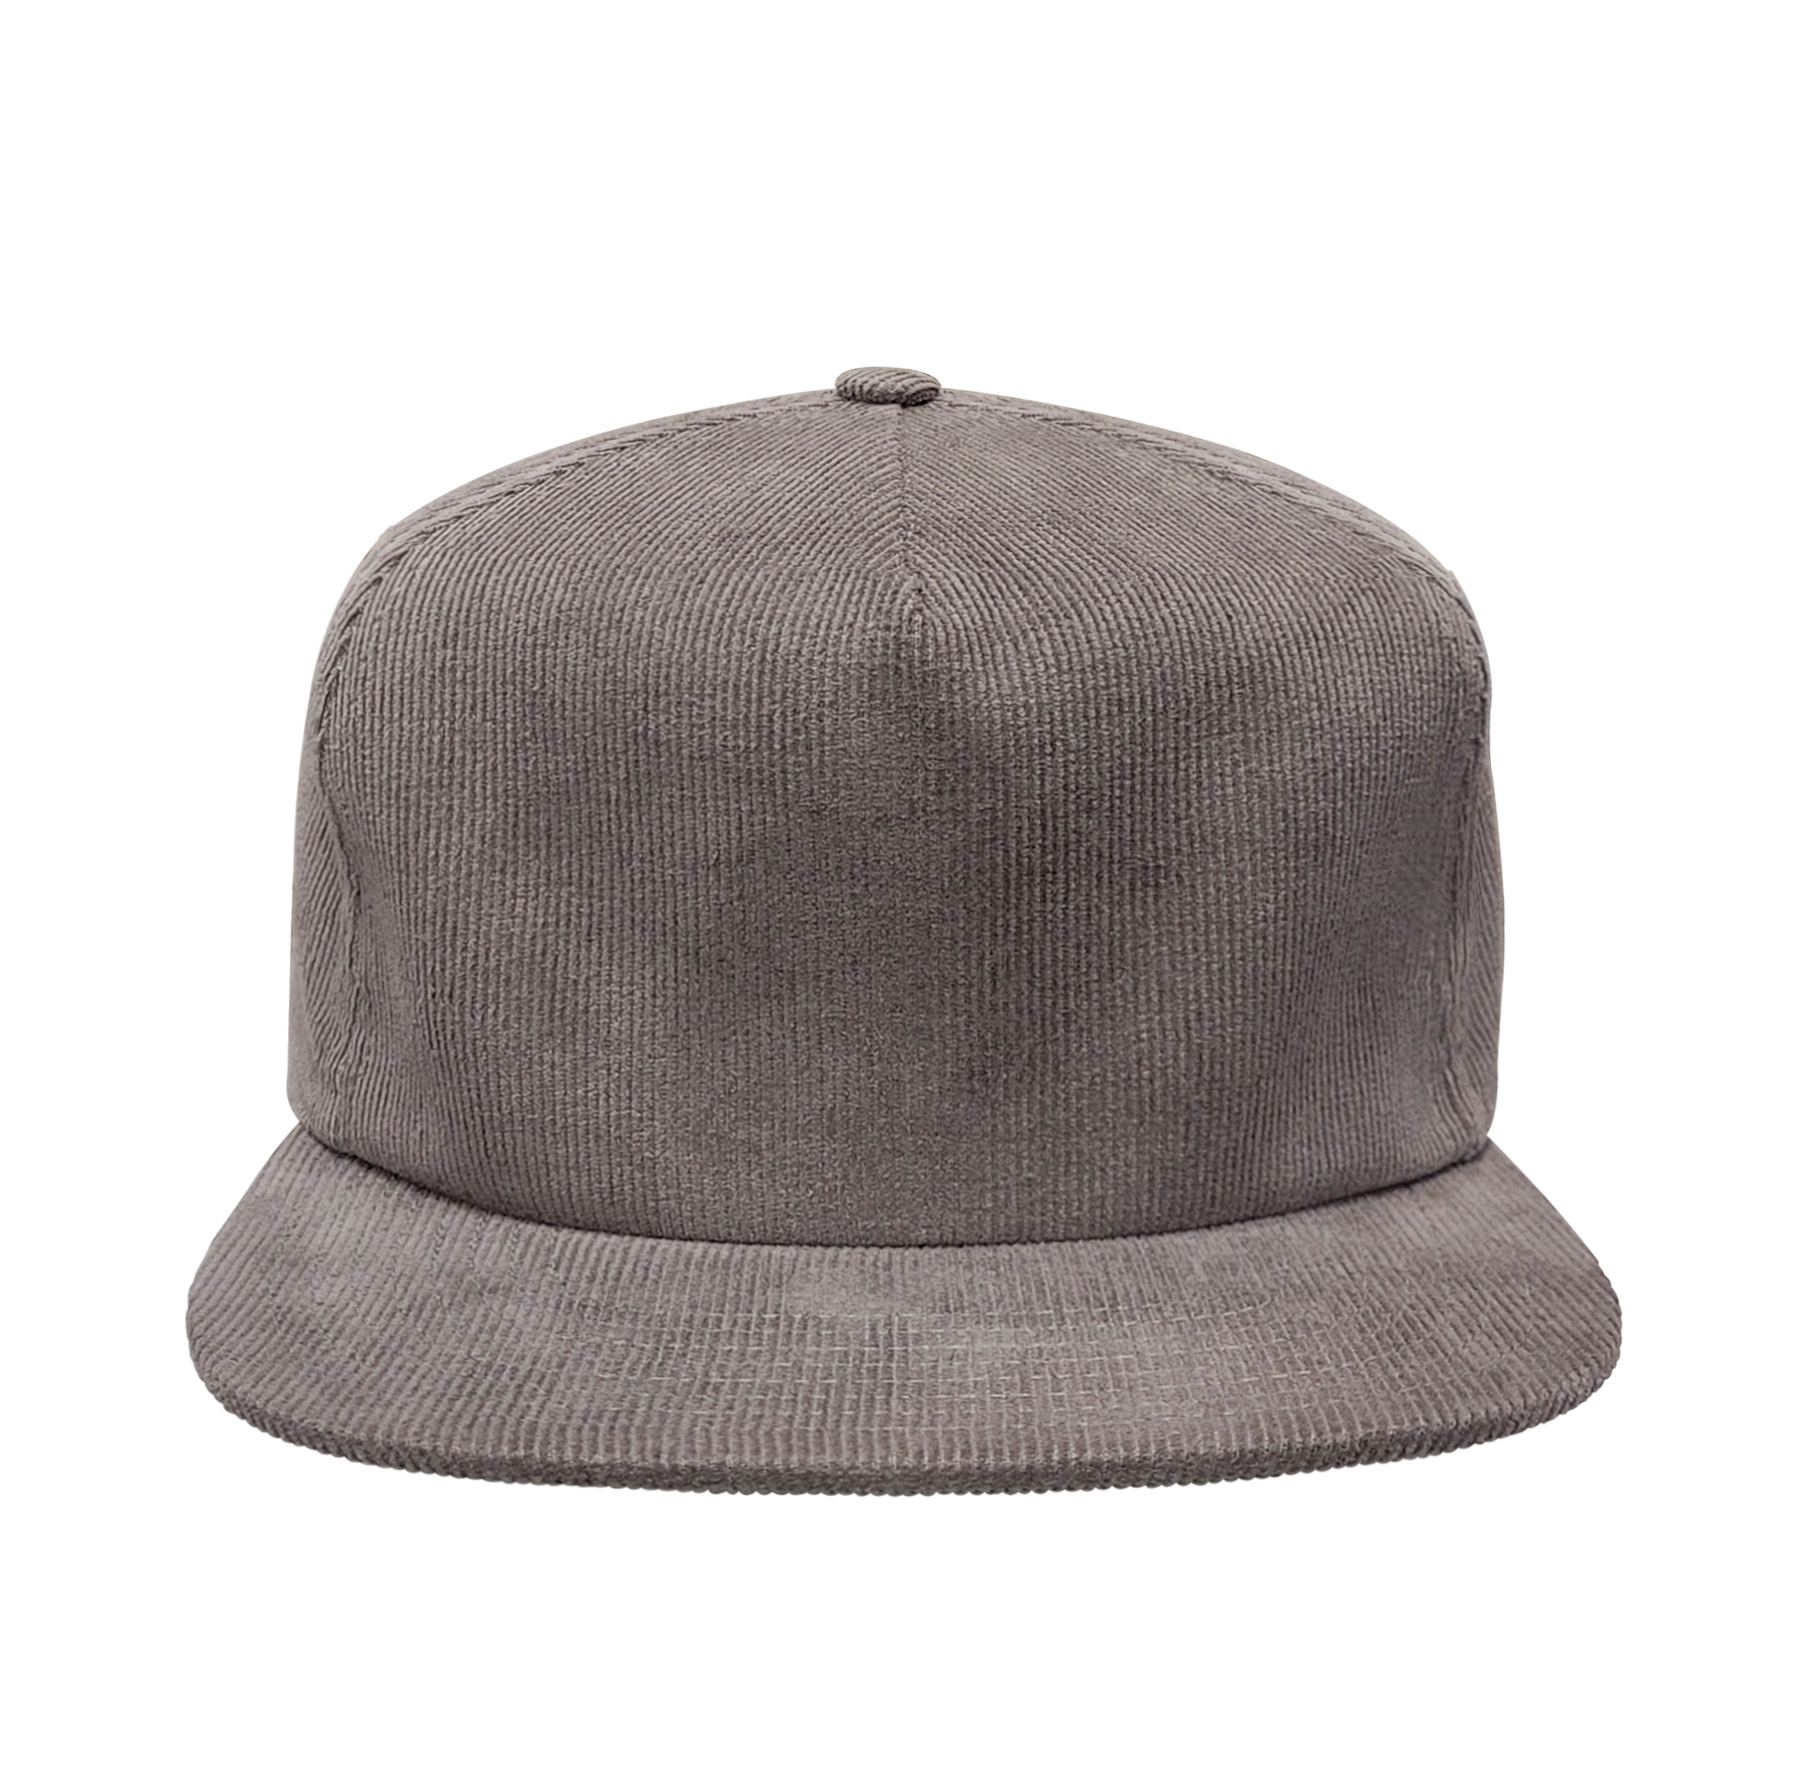 5 Panel Soft Structured Corduroy - CRD19